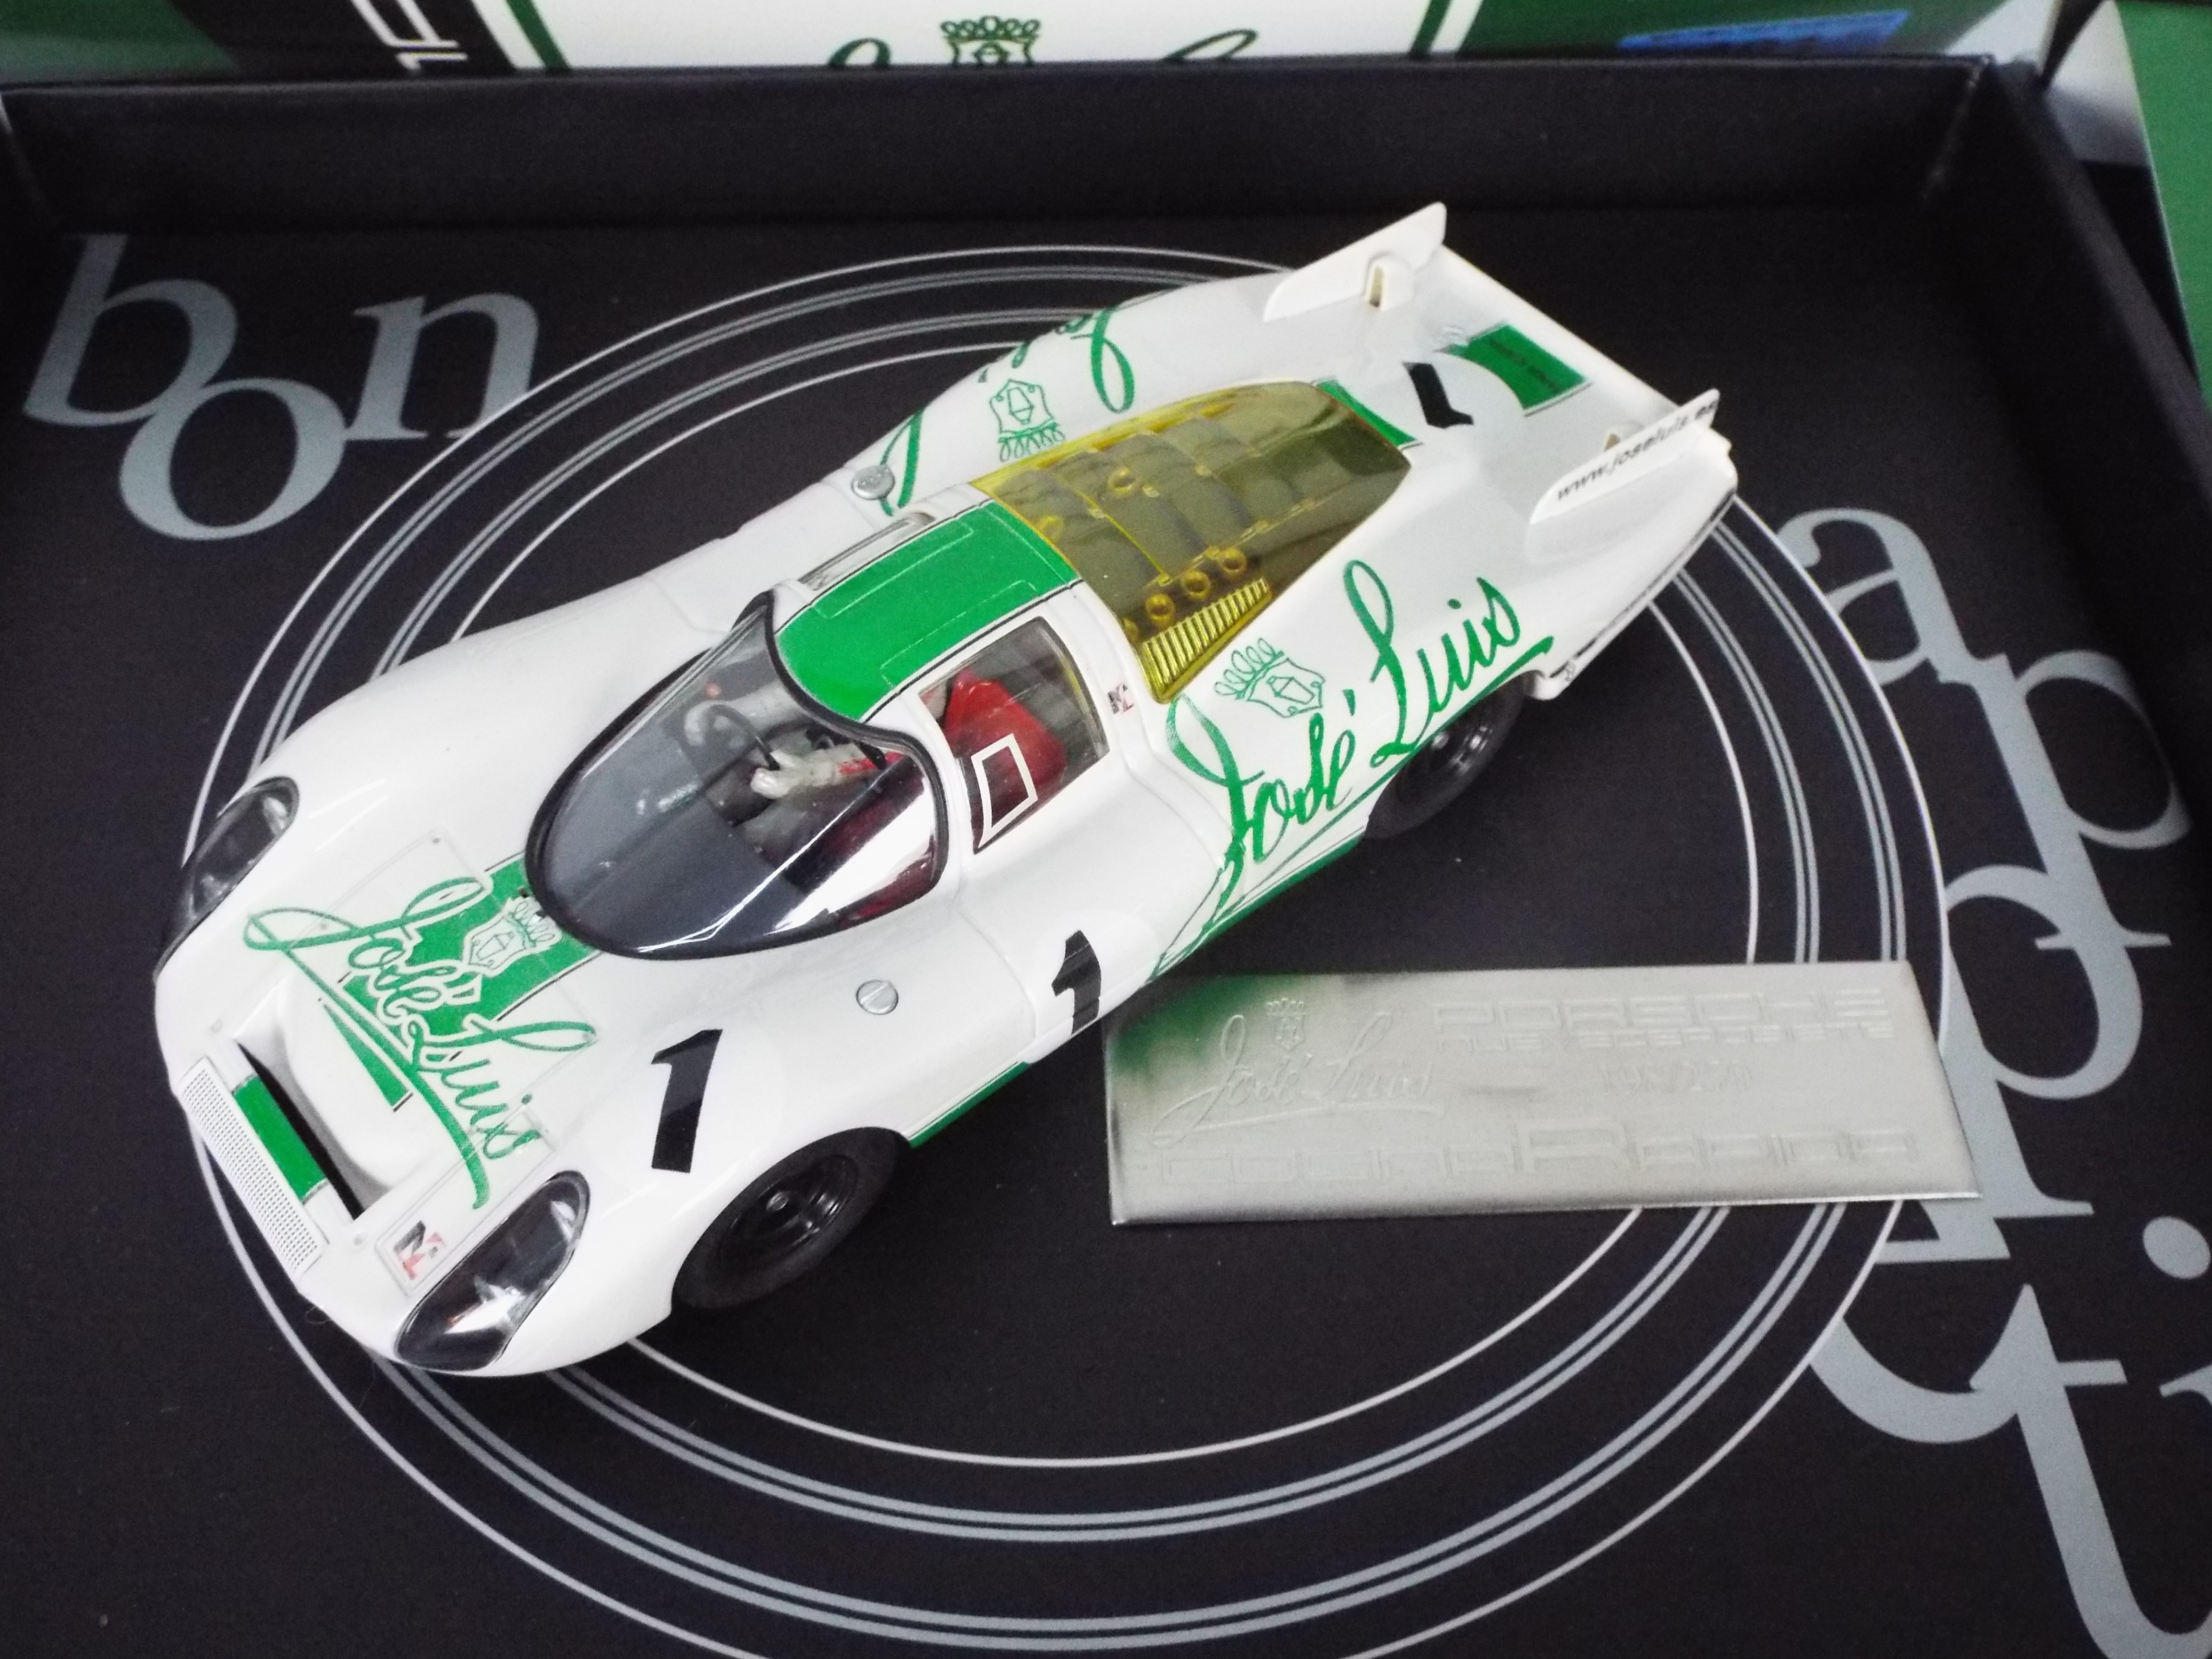 Slot Racing Company - a 1:32 scale SRC Porsche Neuvecerosiette Jose Luis in display box issued in - Image 2 of 6